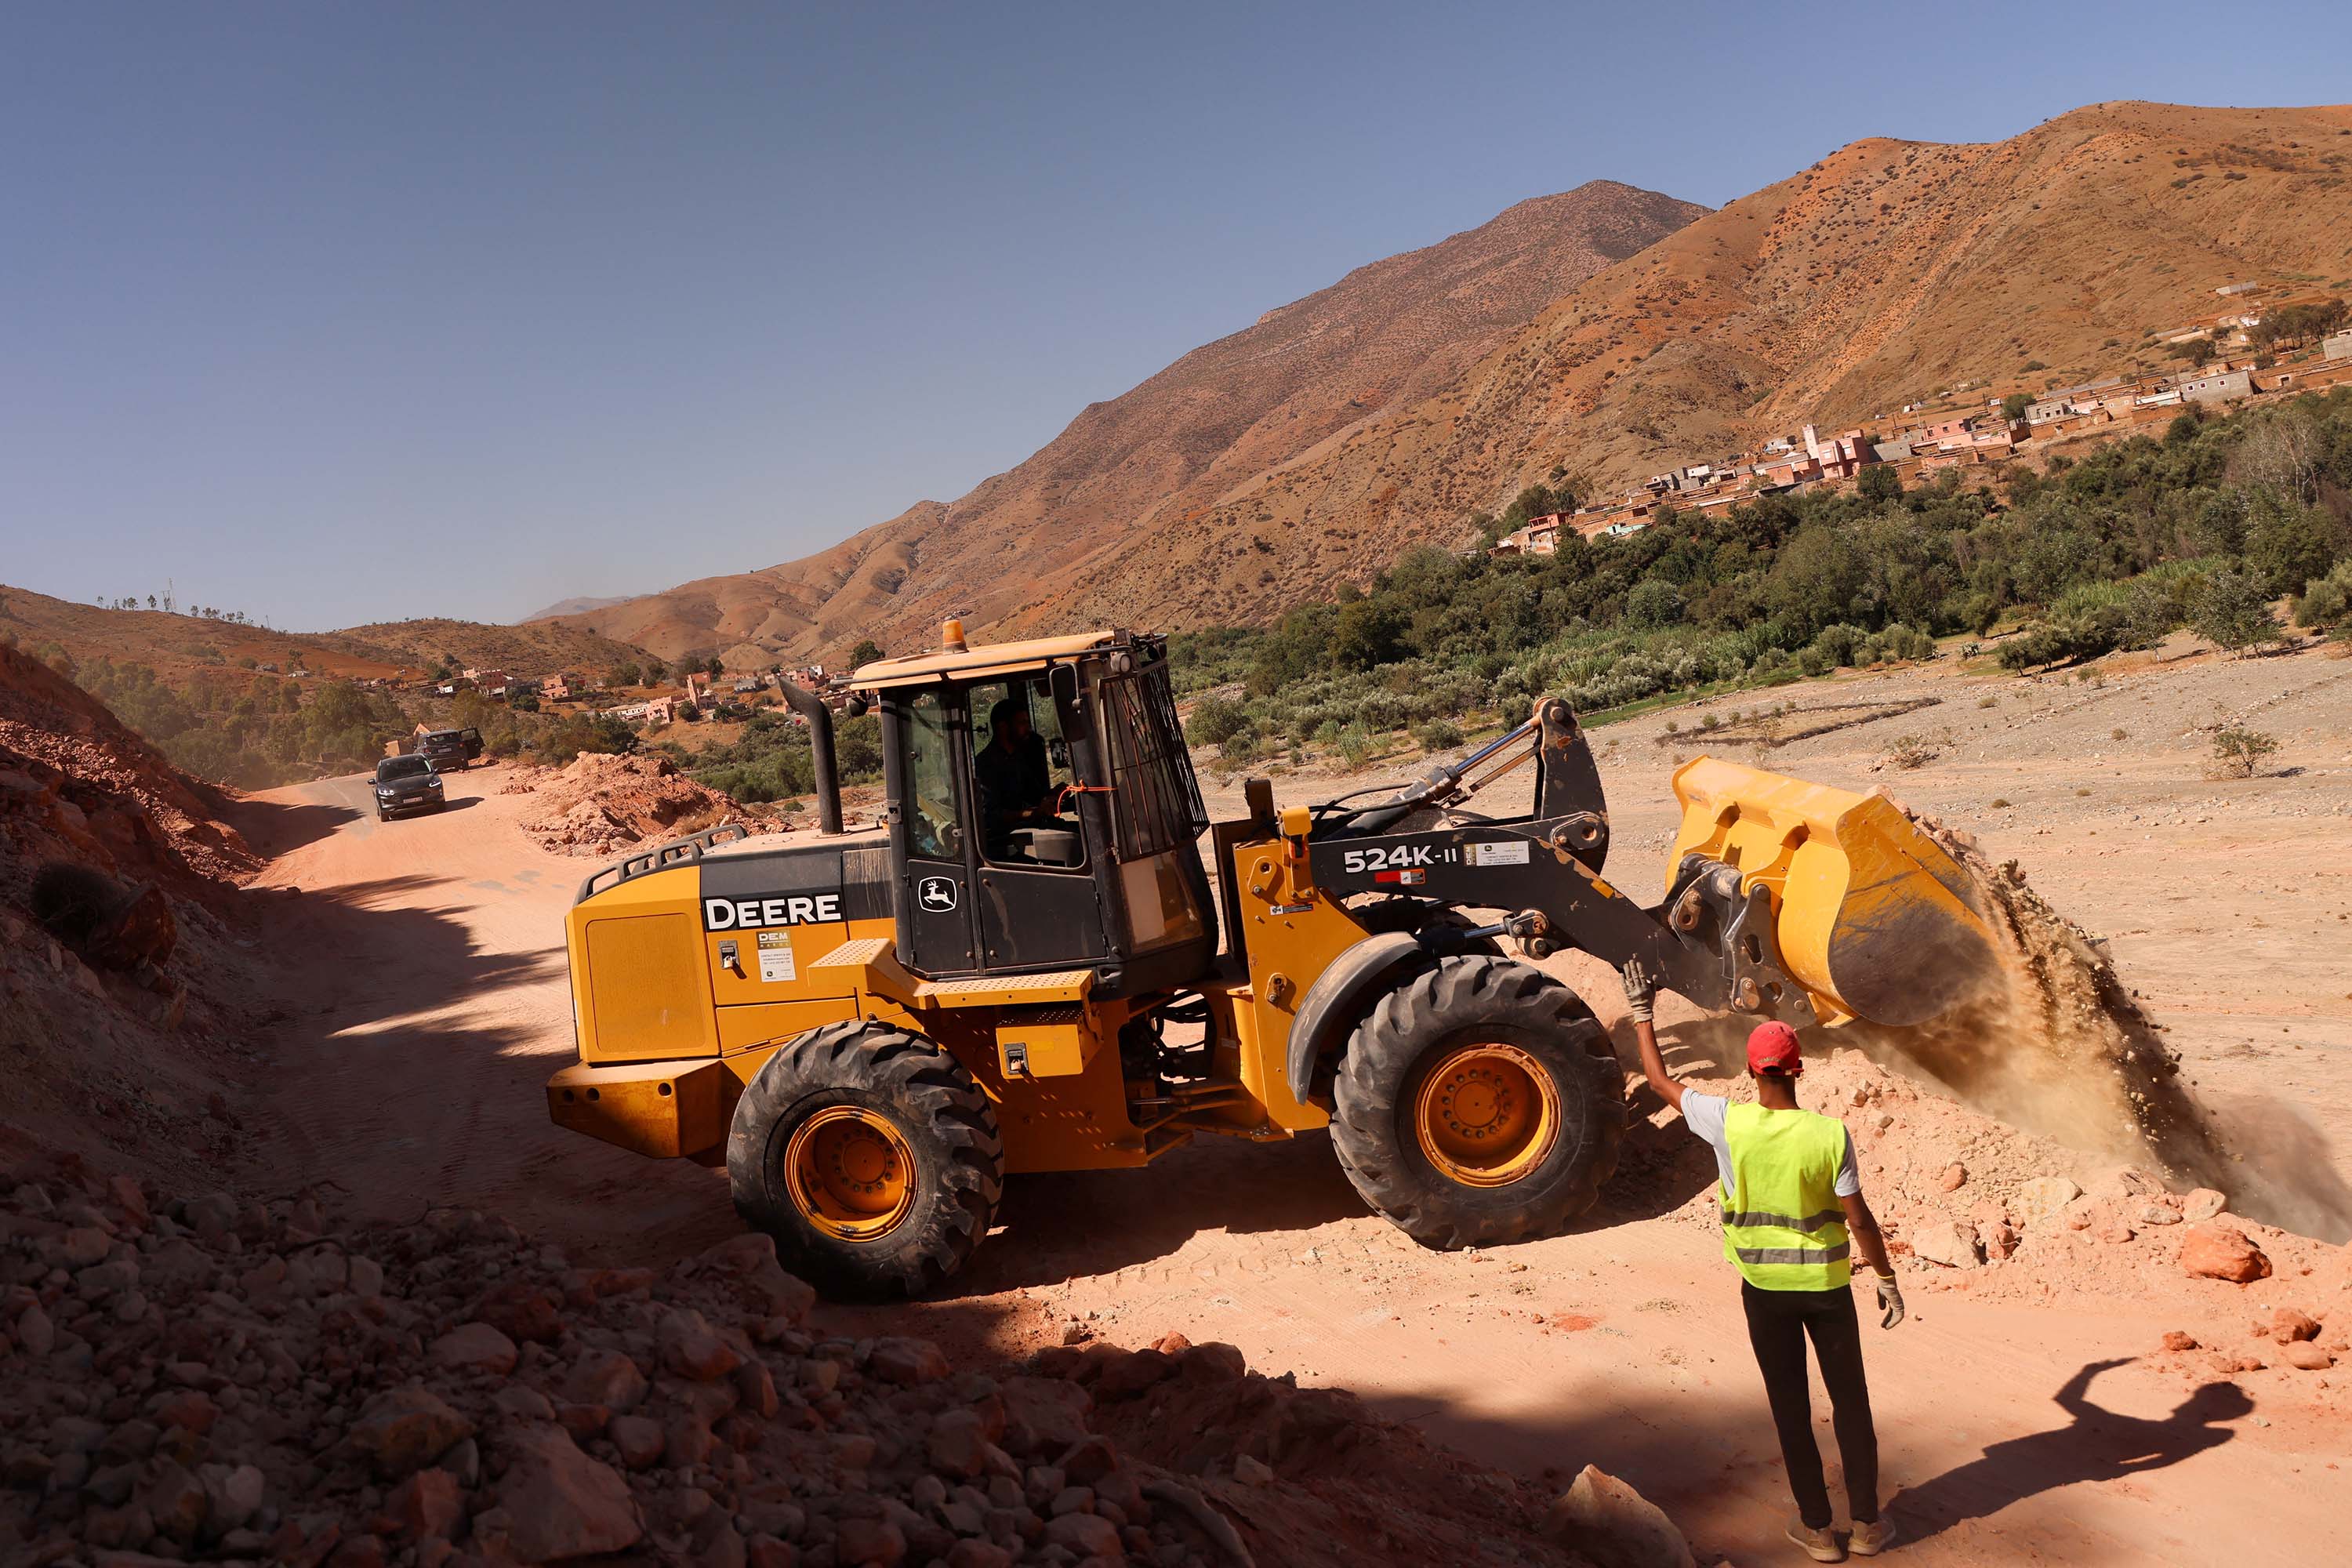 Machinery is used to remove debris from a road outside Adassil, Morocco, on Monday, September 11.